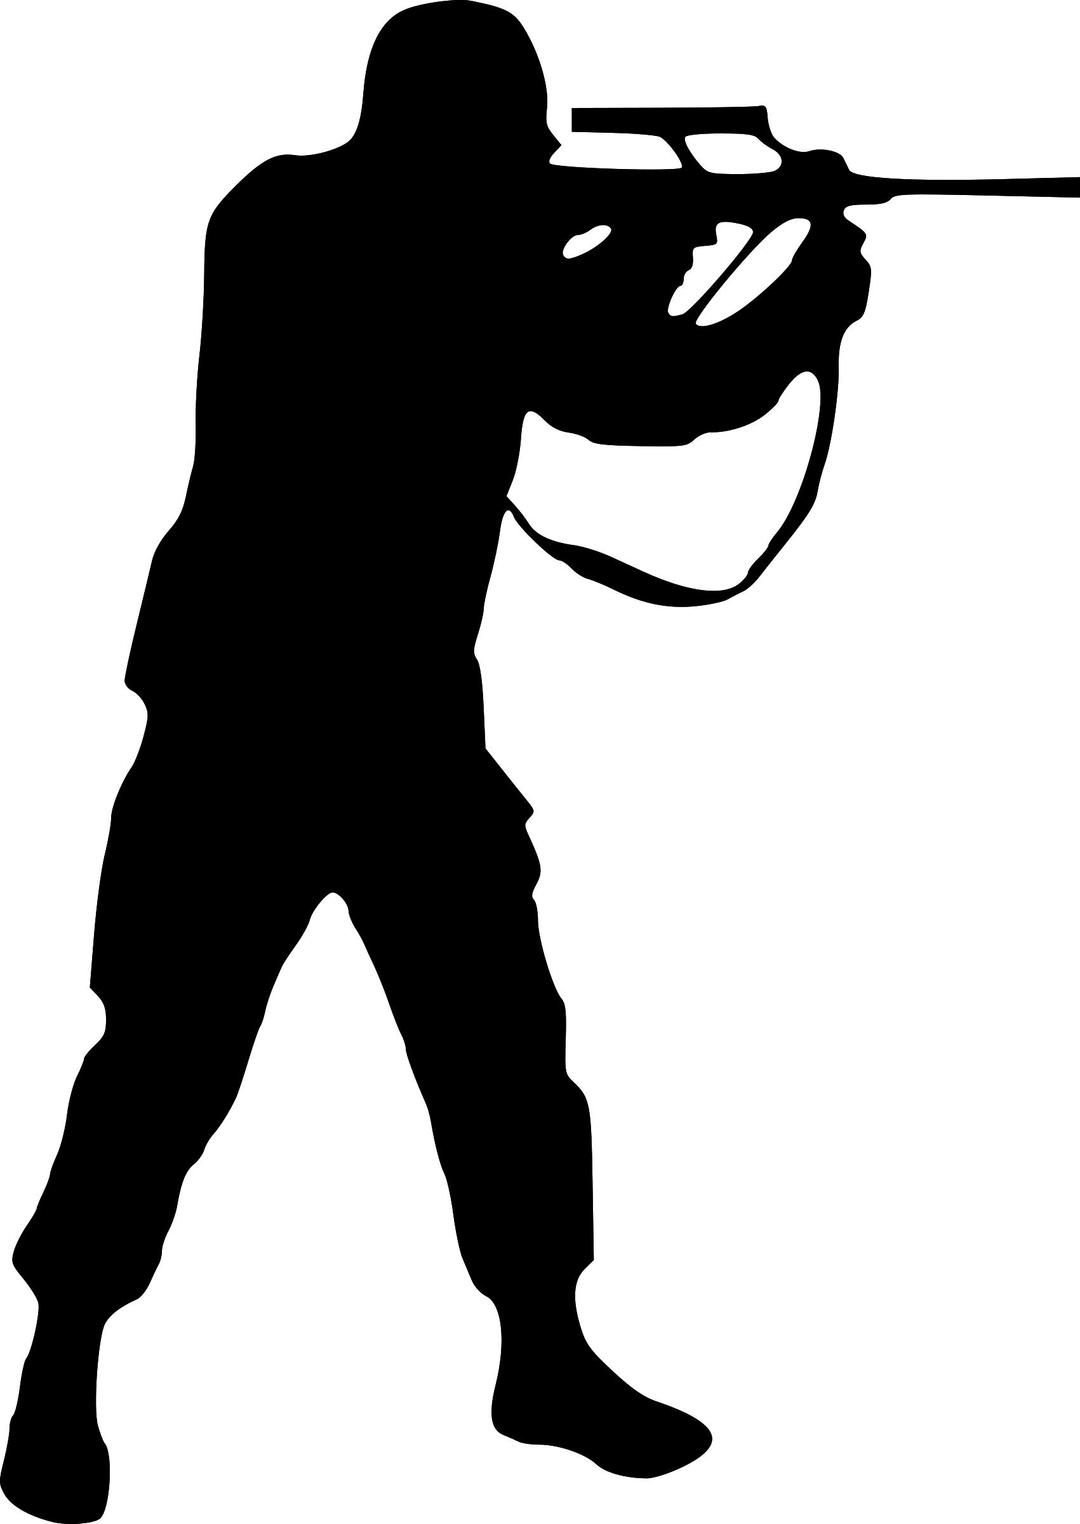 soldier-silhouette png transparent